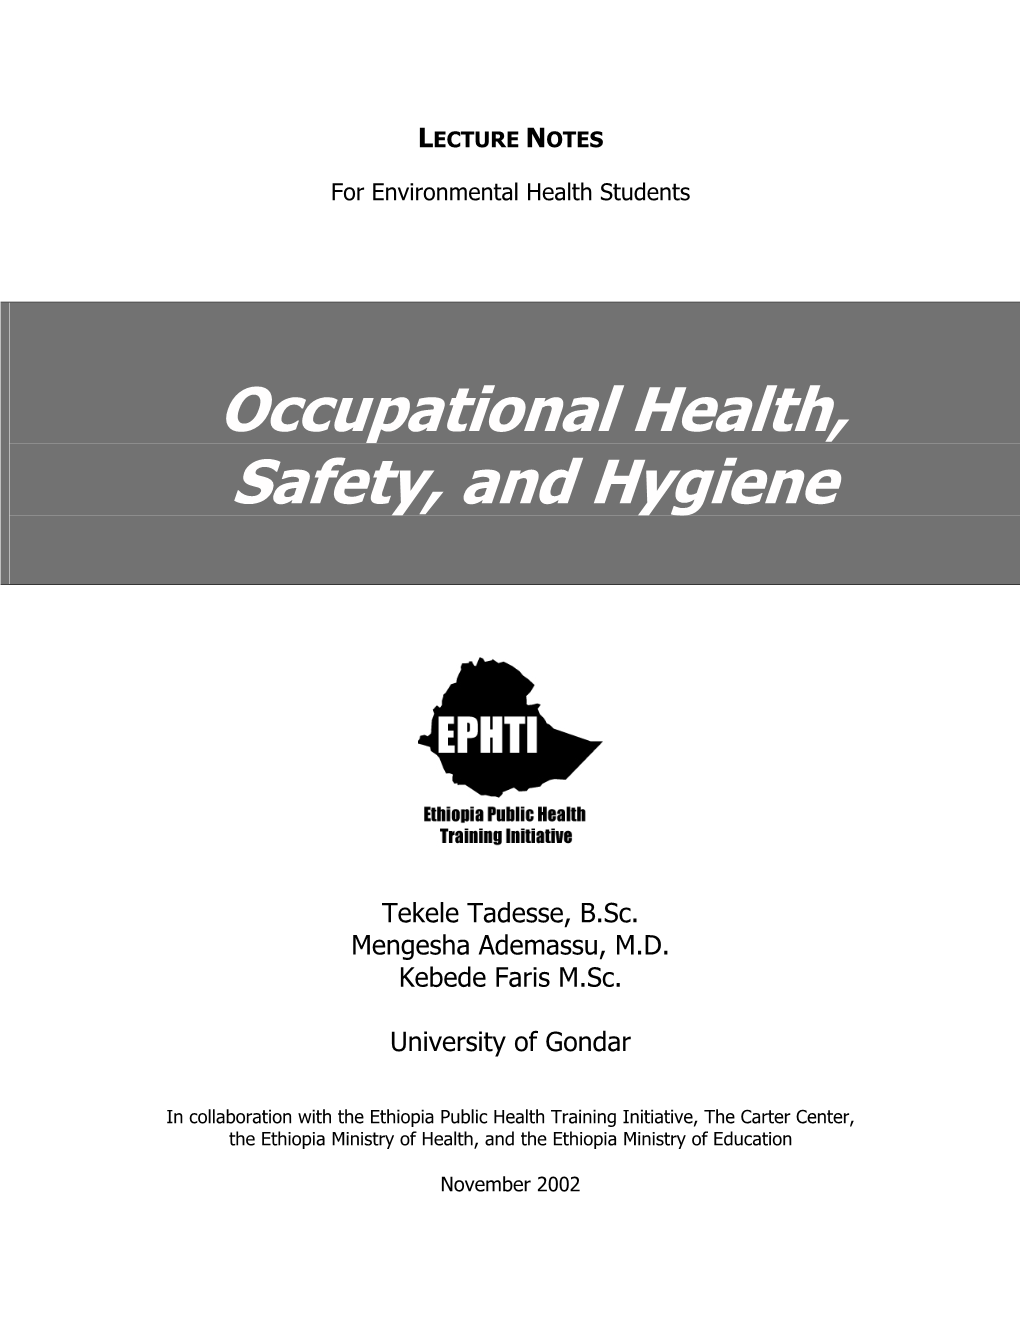 Occupational Health, Safety, and Hygiene